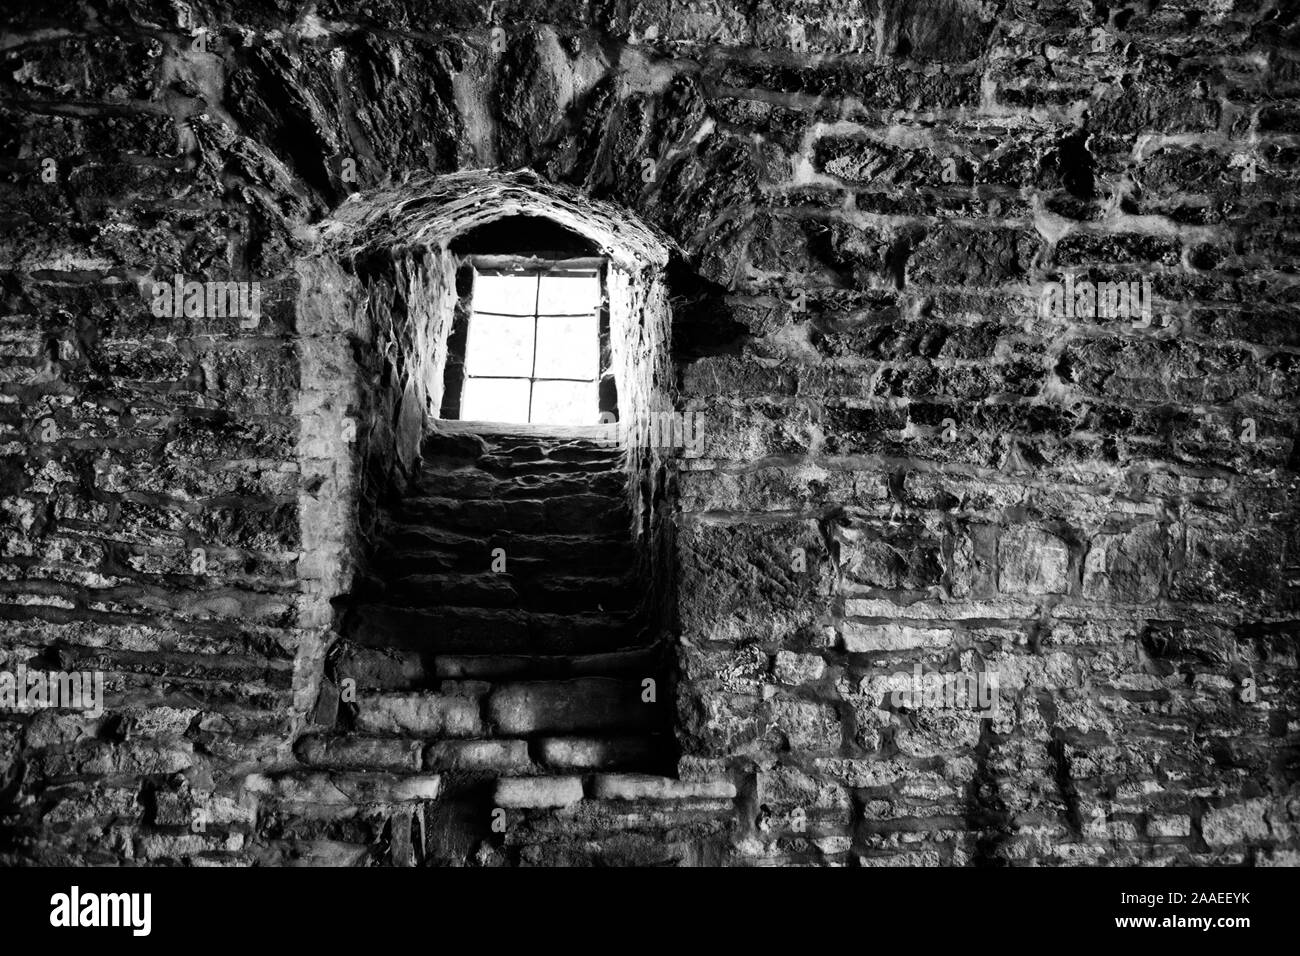 A cellar of an old castle, Germany, Europe Stock Photo